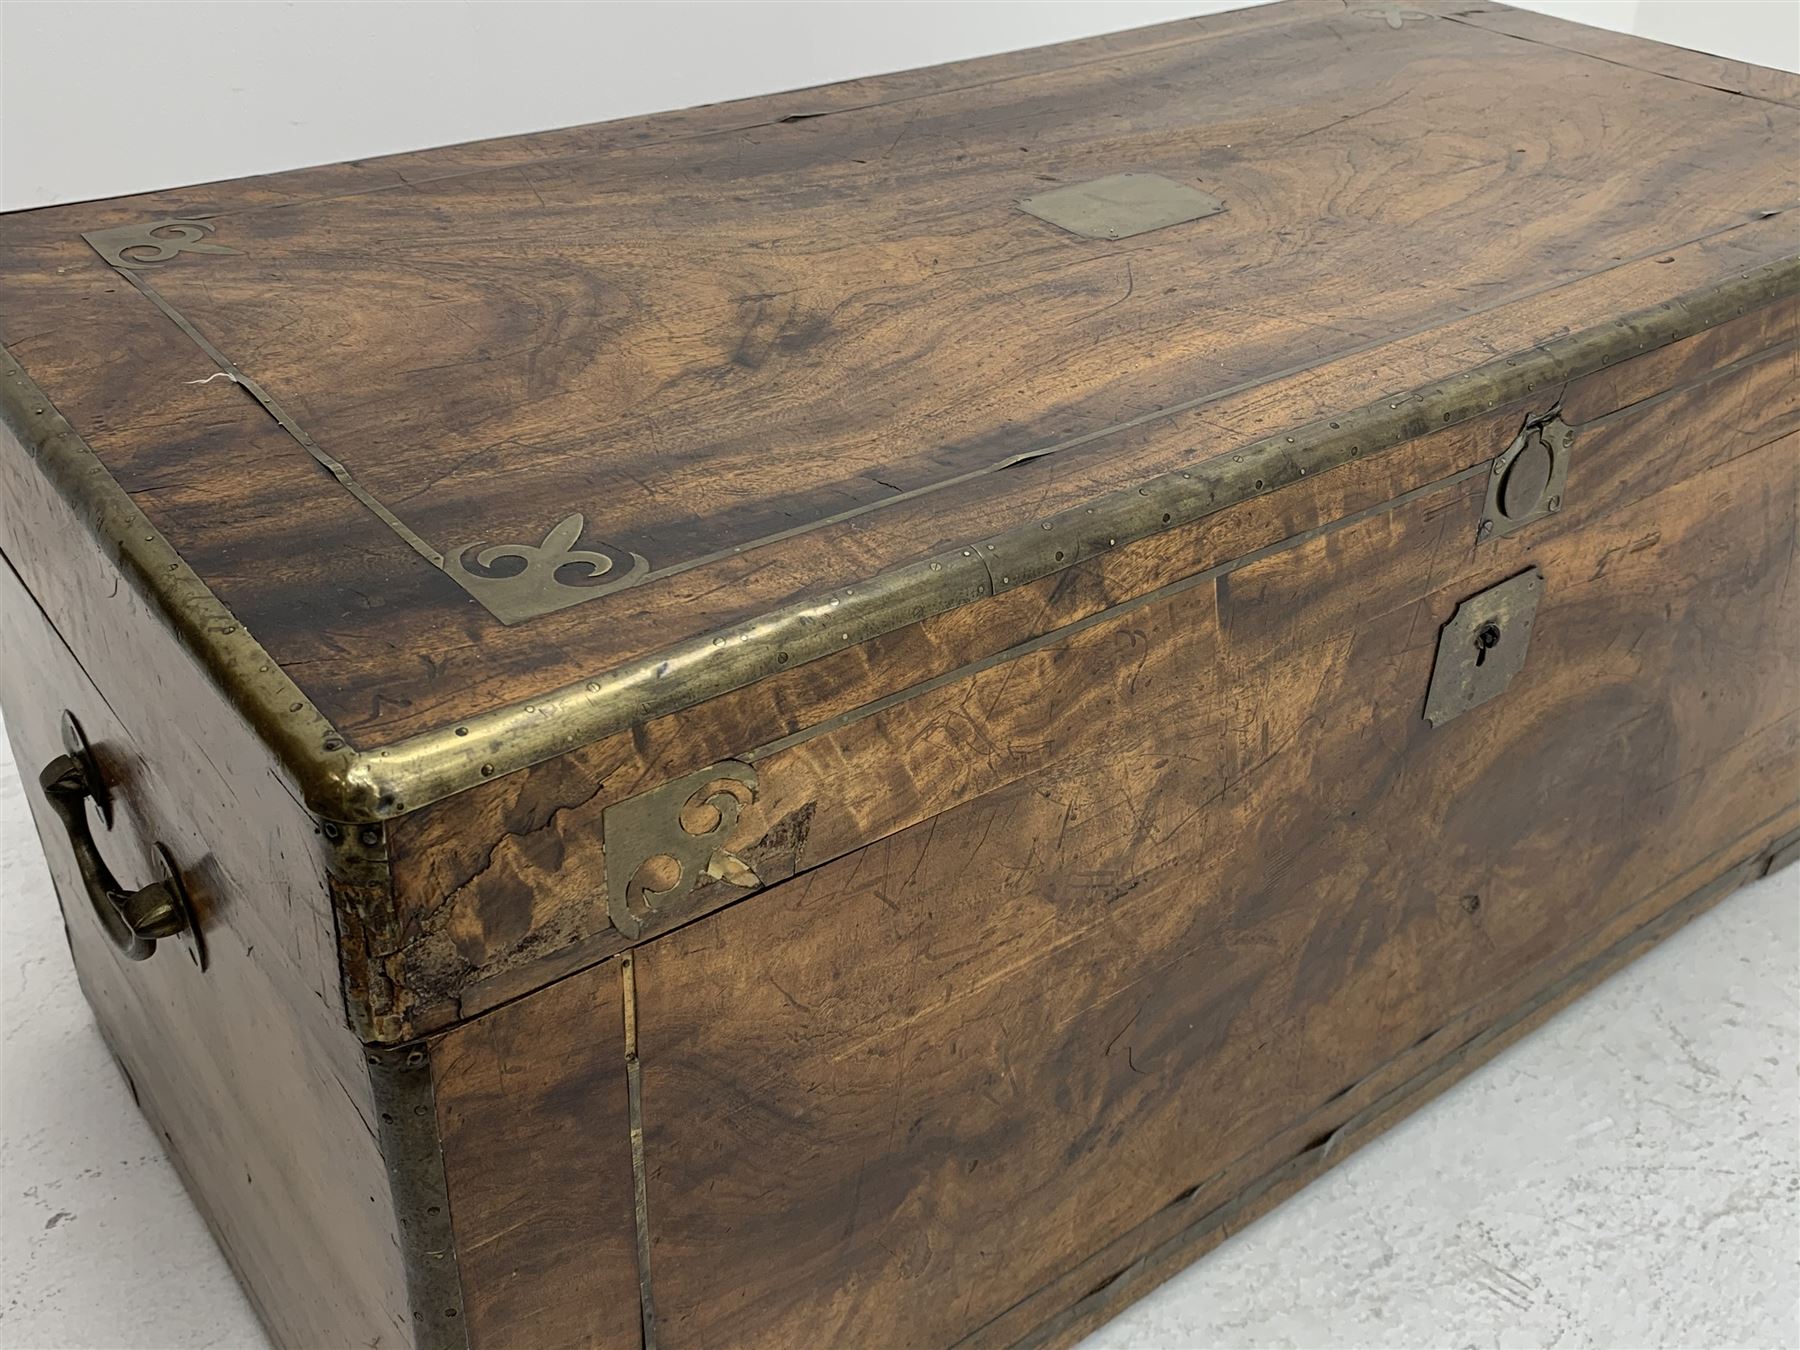 19th century brass bound camphor wood campaign chest, with decorative brass inlays and carrying hand - Image 3 of 5